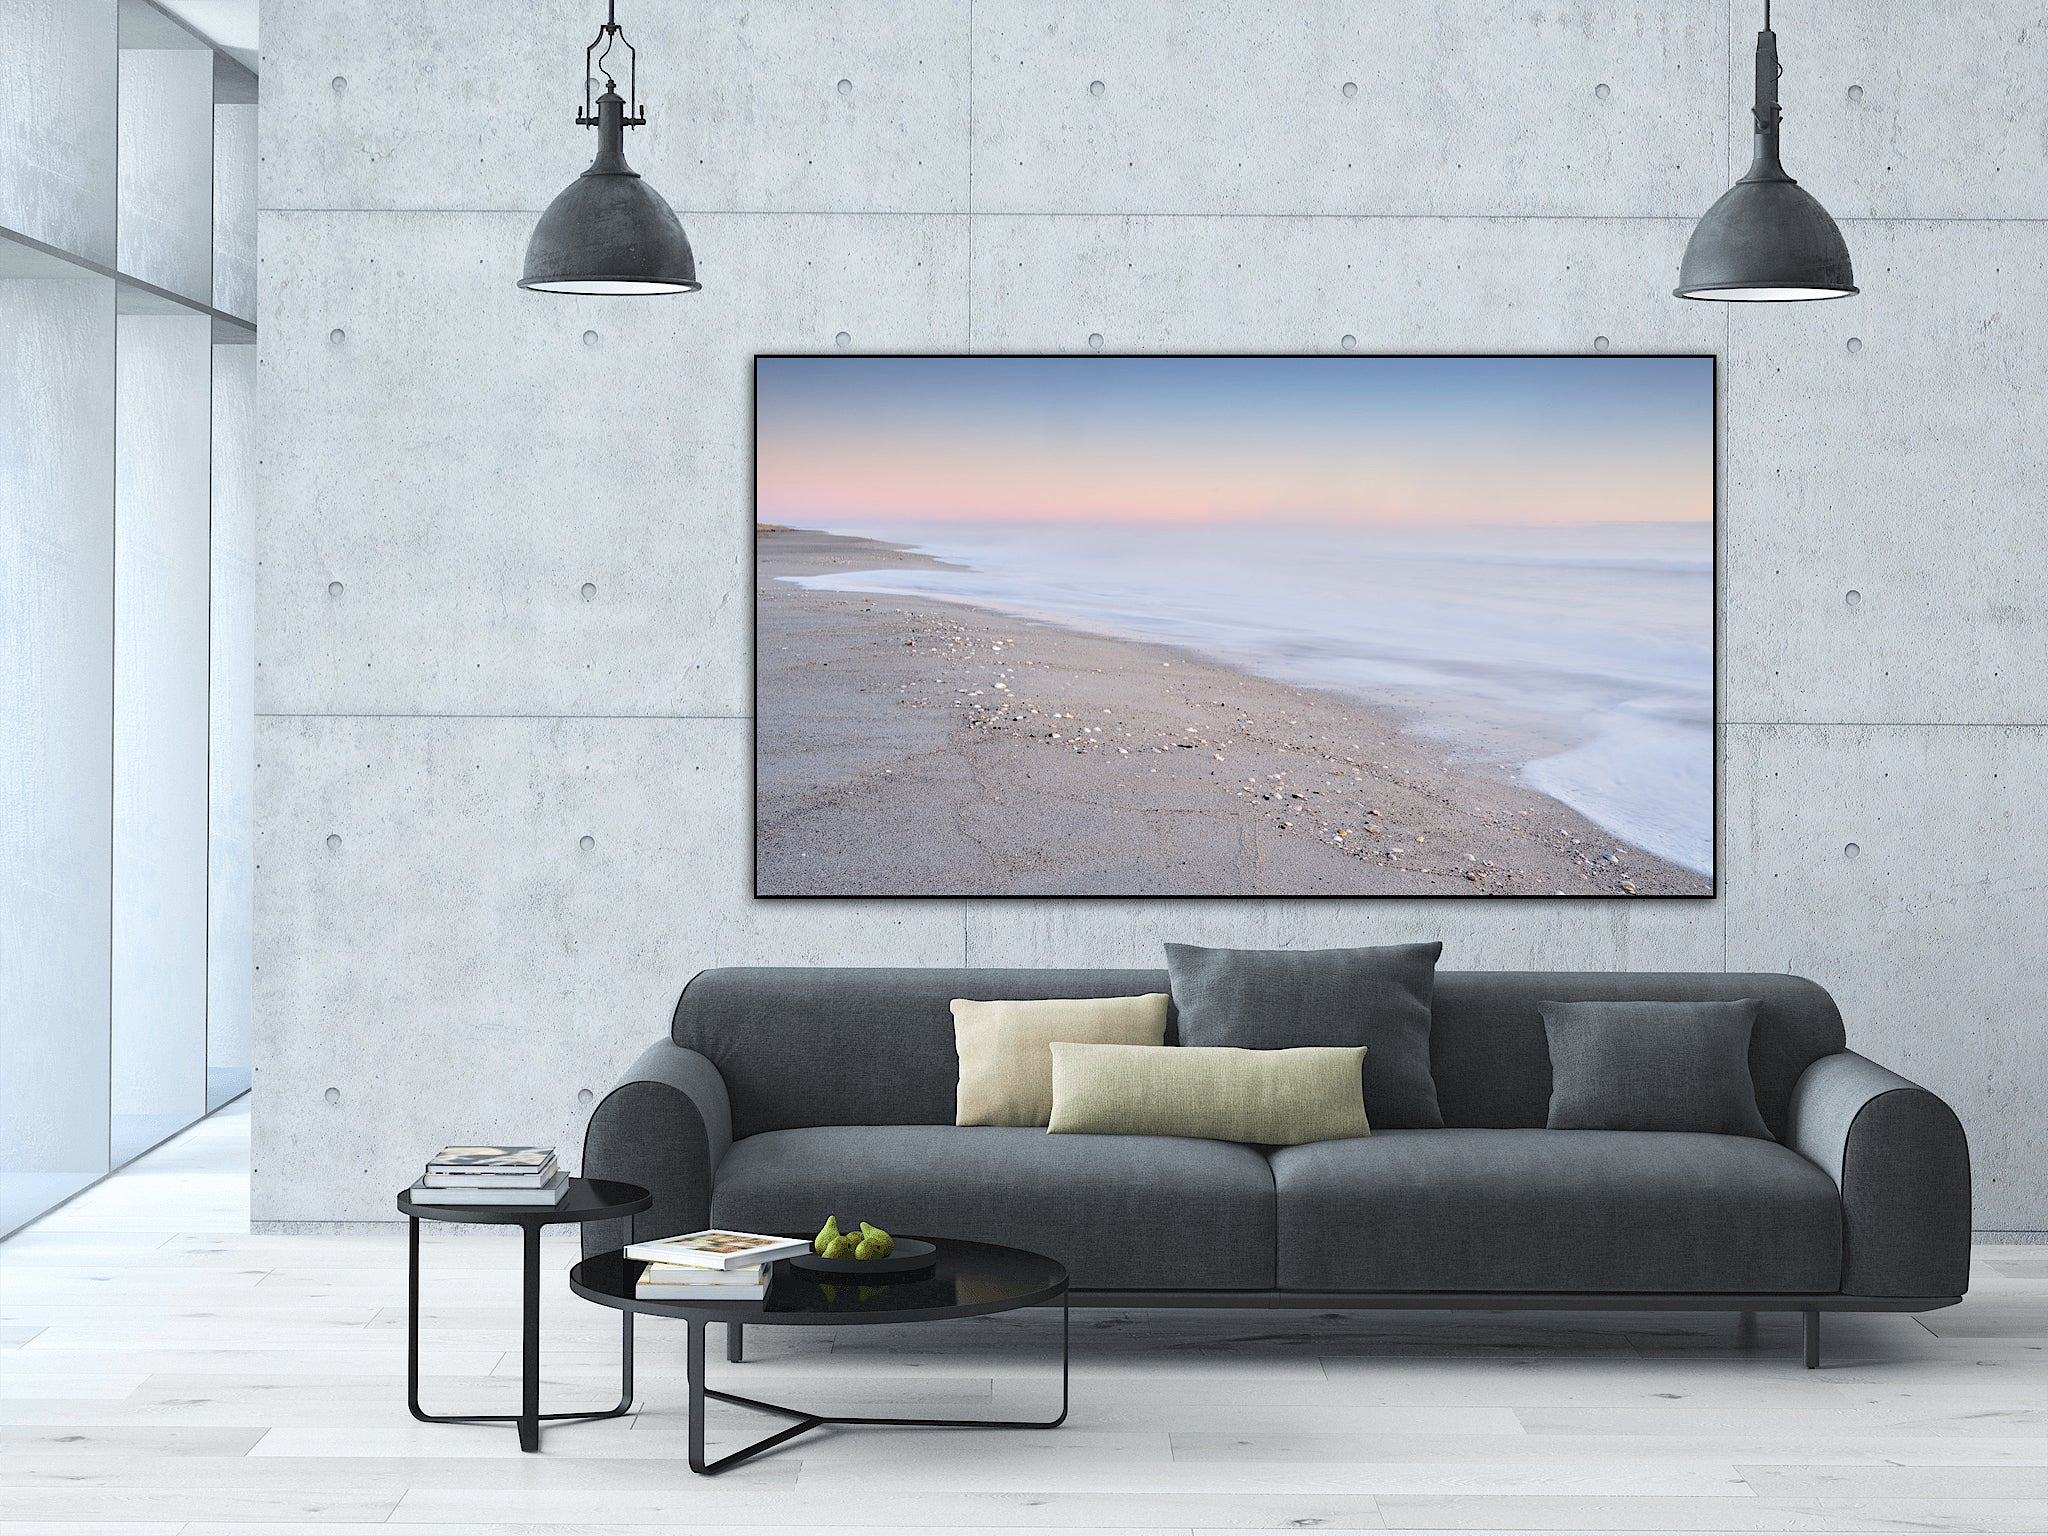 Bringing Nature Home - Discover the Art of Transforming Your Space with New Zealand Landscape Photography by Award Winning Landscape Photographer Stephen Milner.jpg